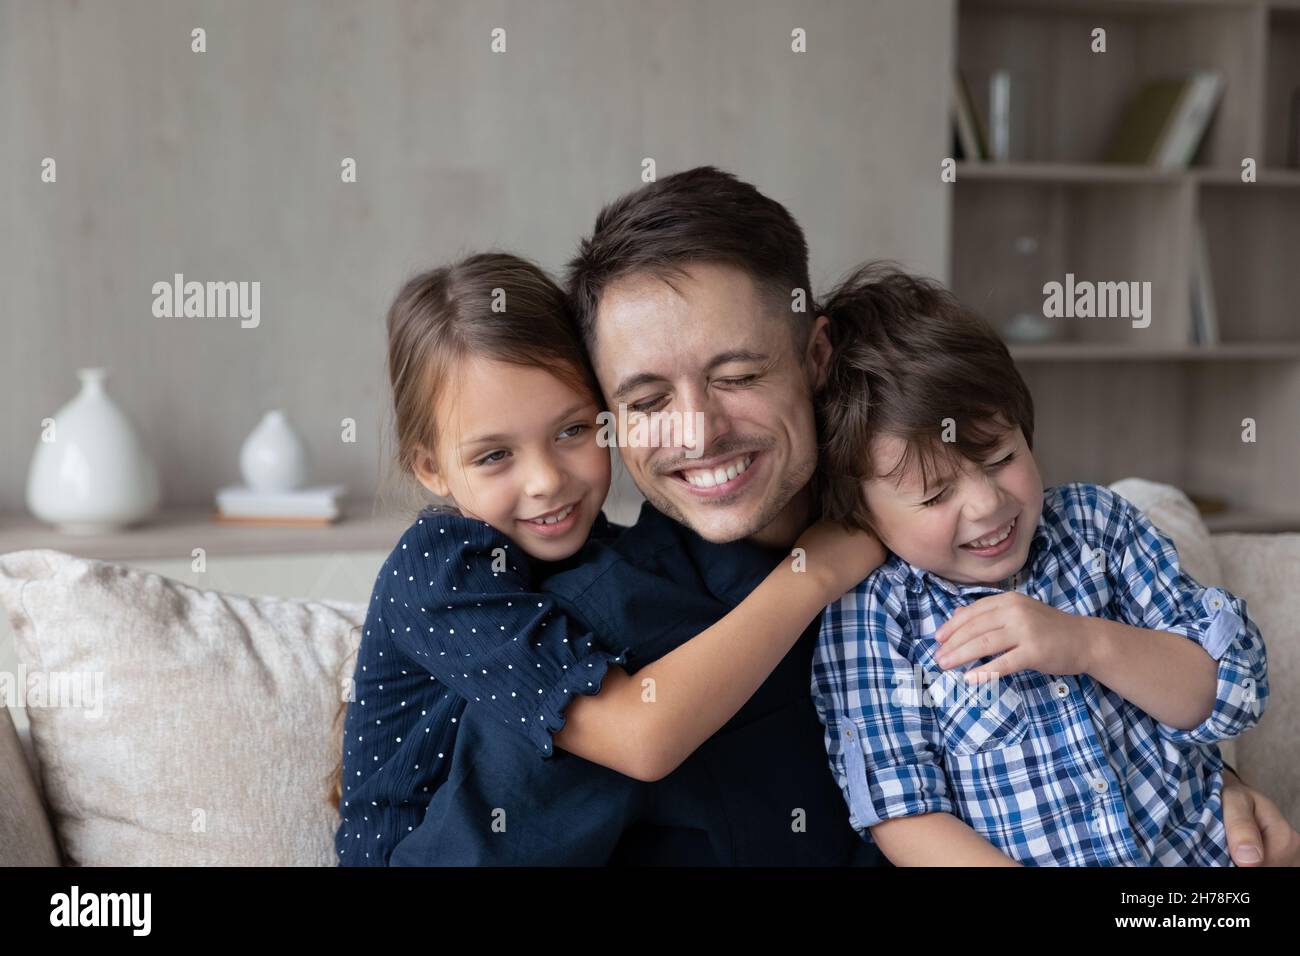 Loving son and daughter cuddling young cheerful daddy Stock Photo